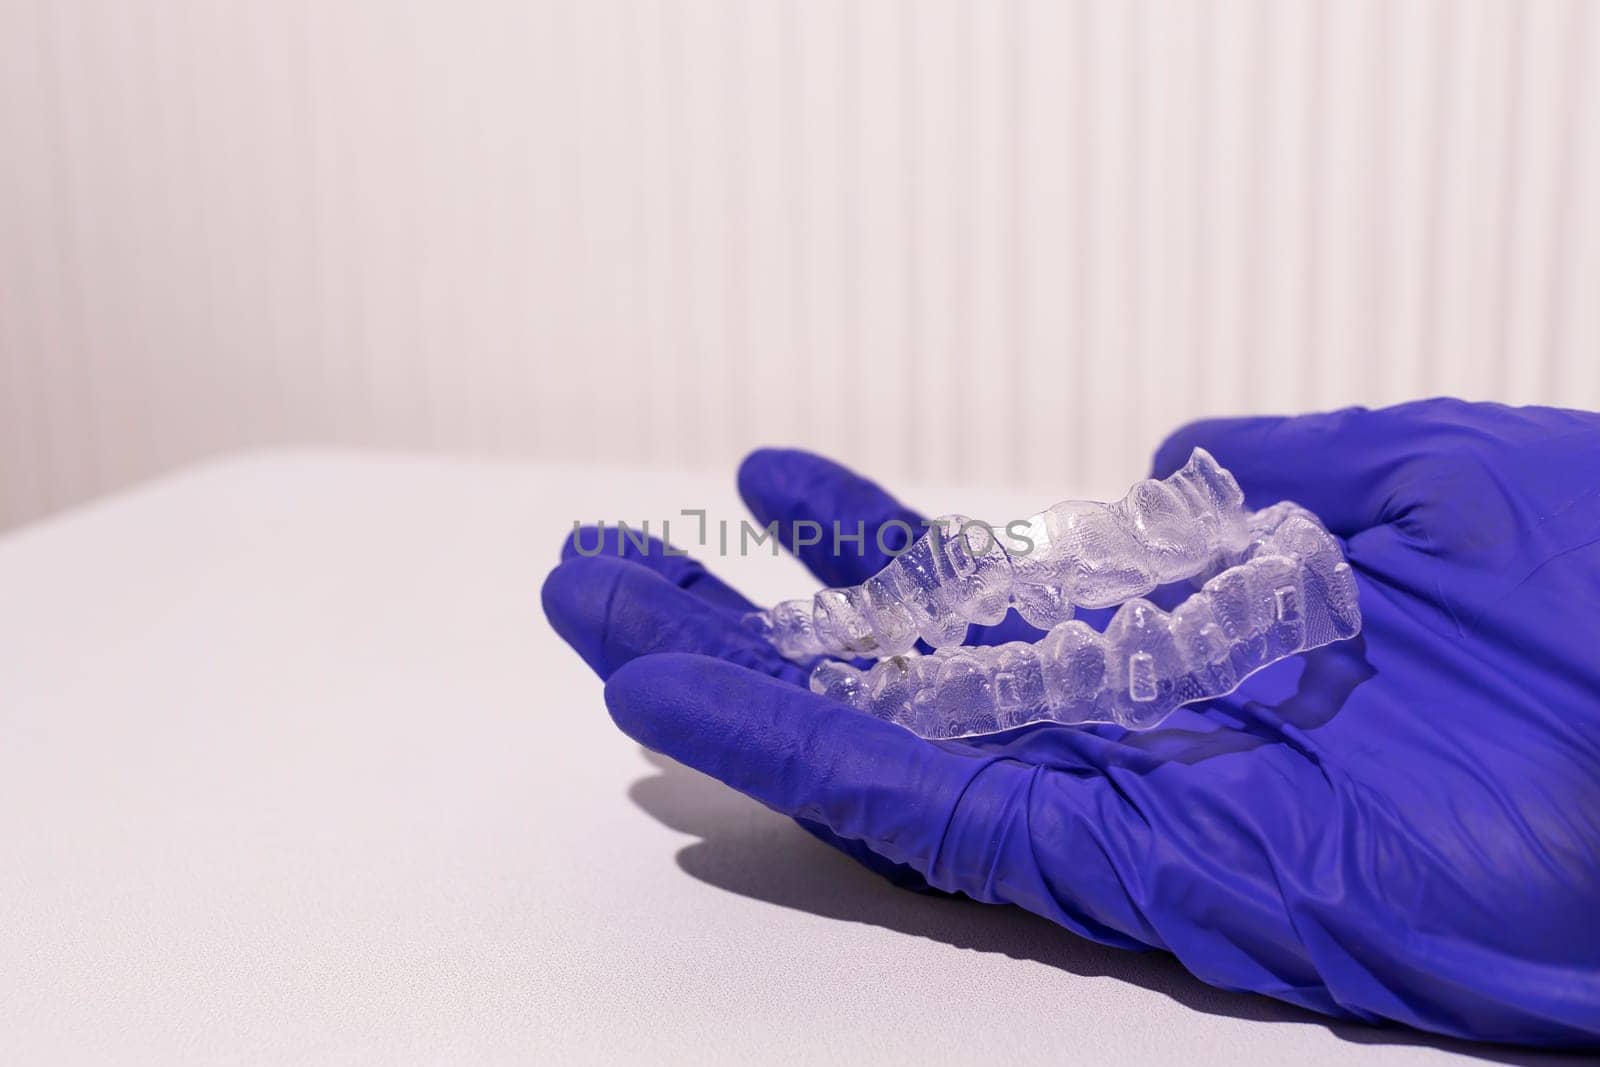 Closeup Invisible Orthodontics Cosmetic Aligners In Doctor's Hand. Adjusting Transparent, Invisalign Braces. Dental Care, Orthodontic. Copy Space For Text, Horizontal Plane. Mockup High quality photo